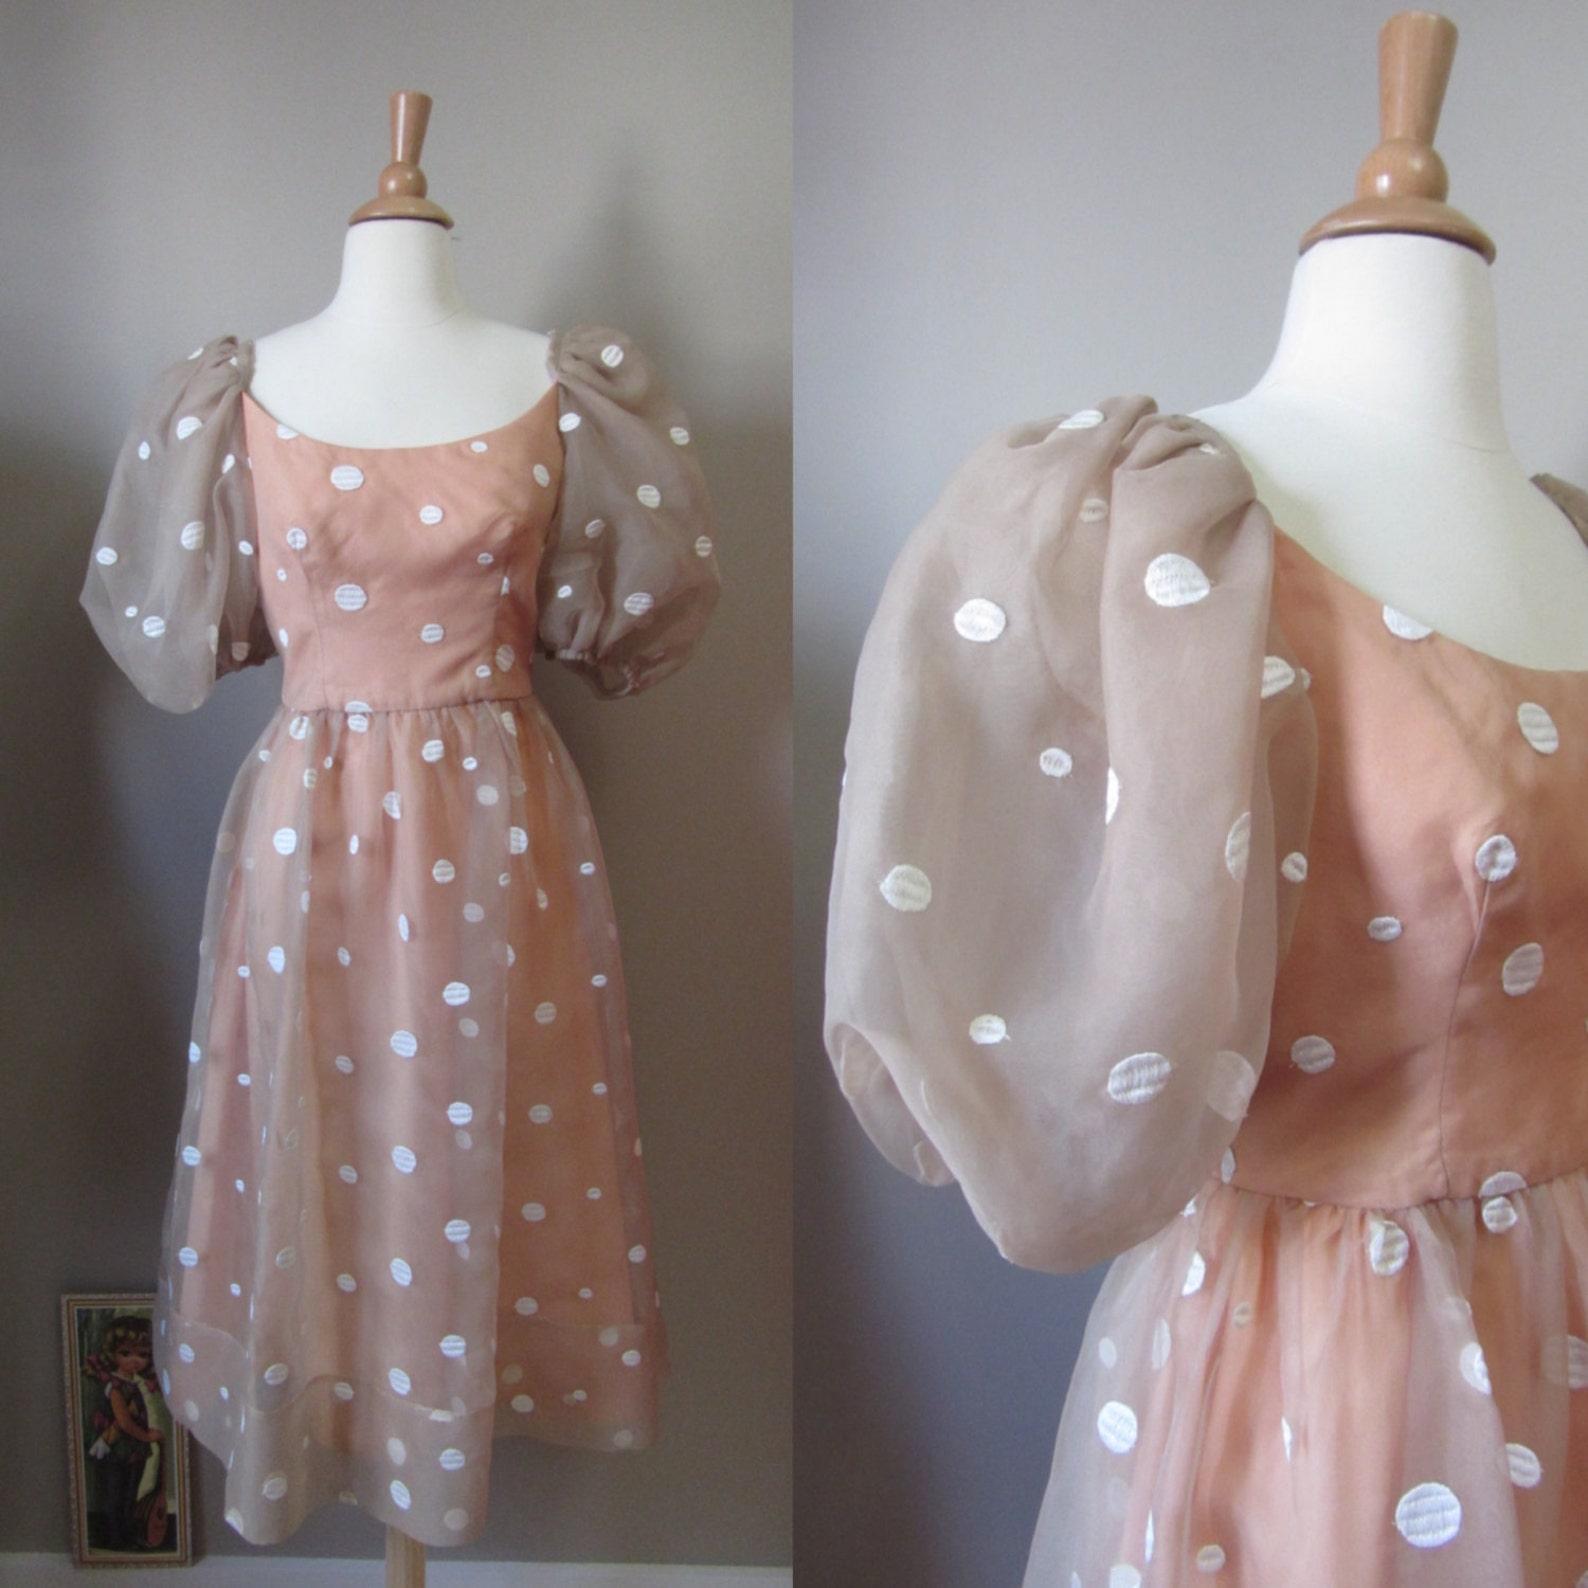 Lillie Rubin Polka Dot Dress, Circa 1980s In Excellent Condition For Sale In Brooklyn, NY